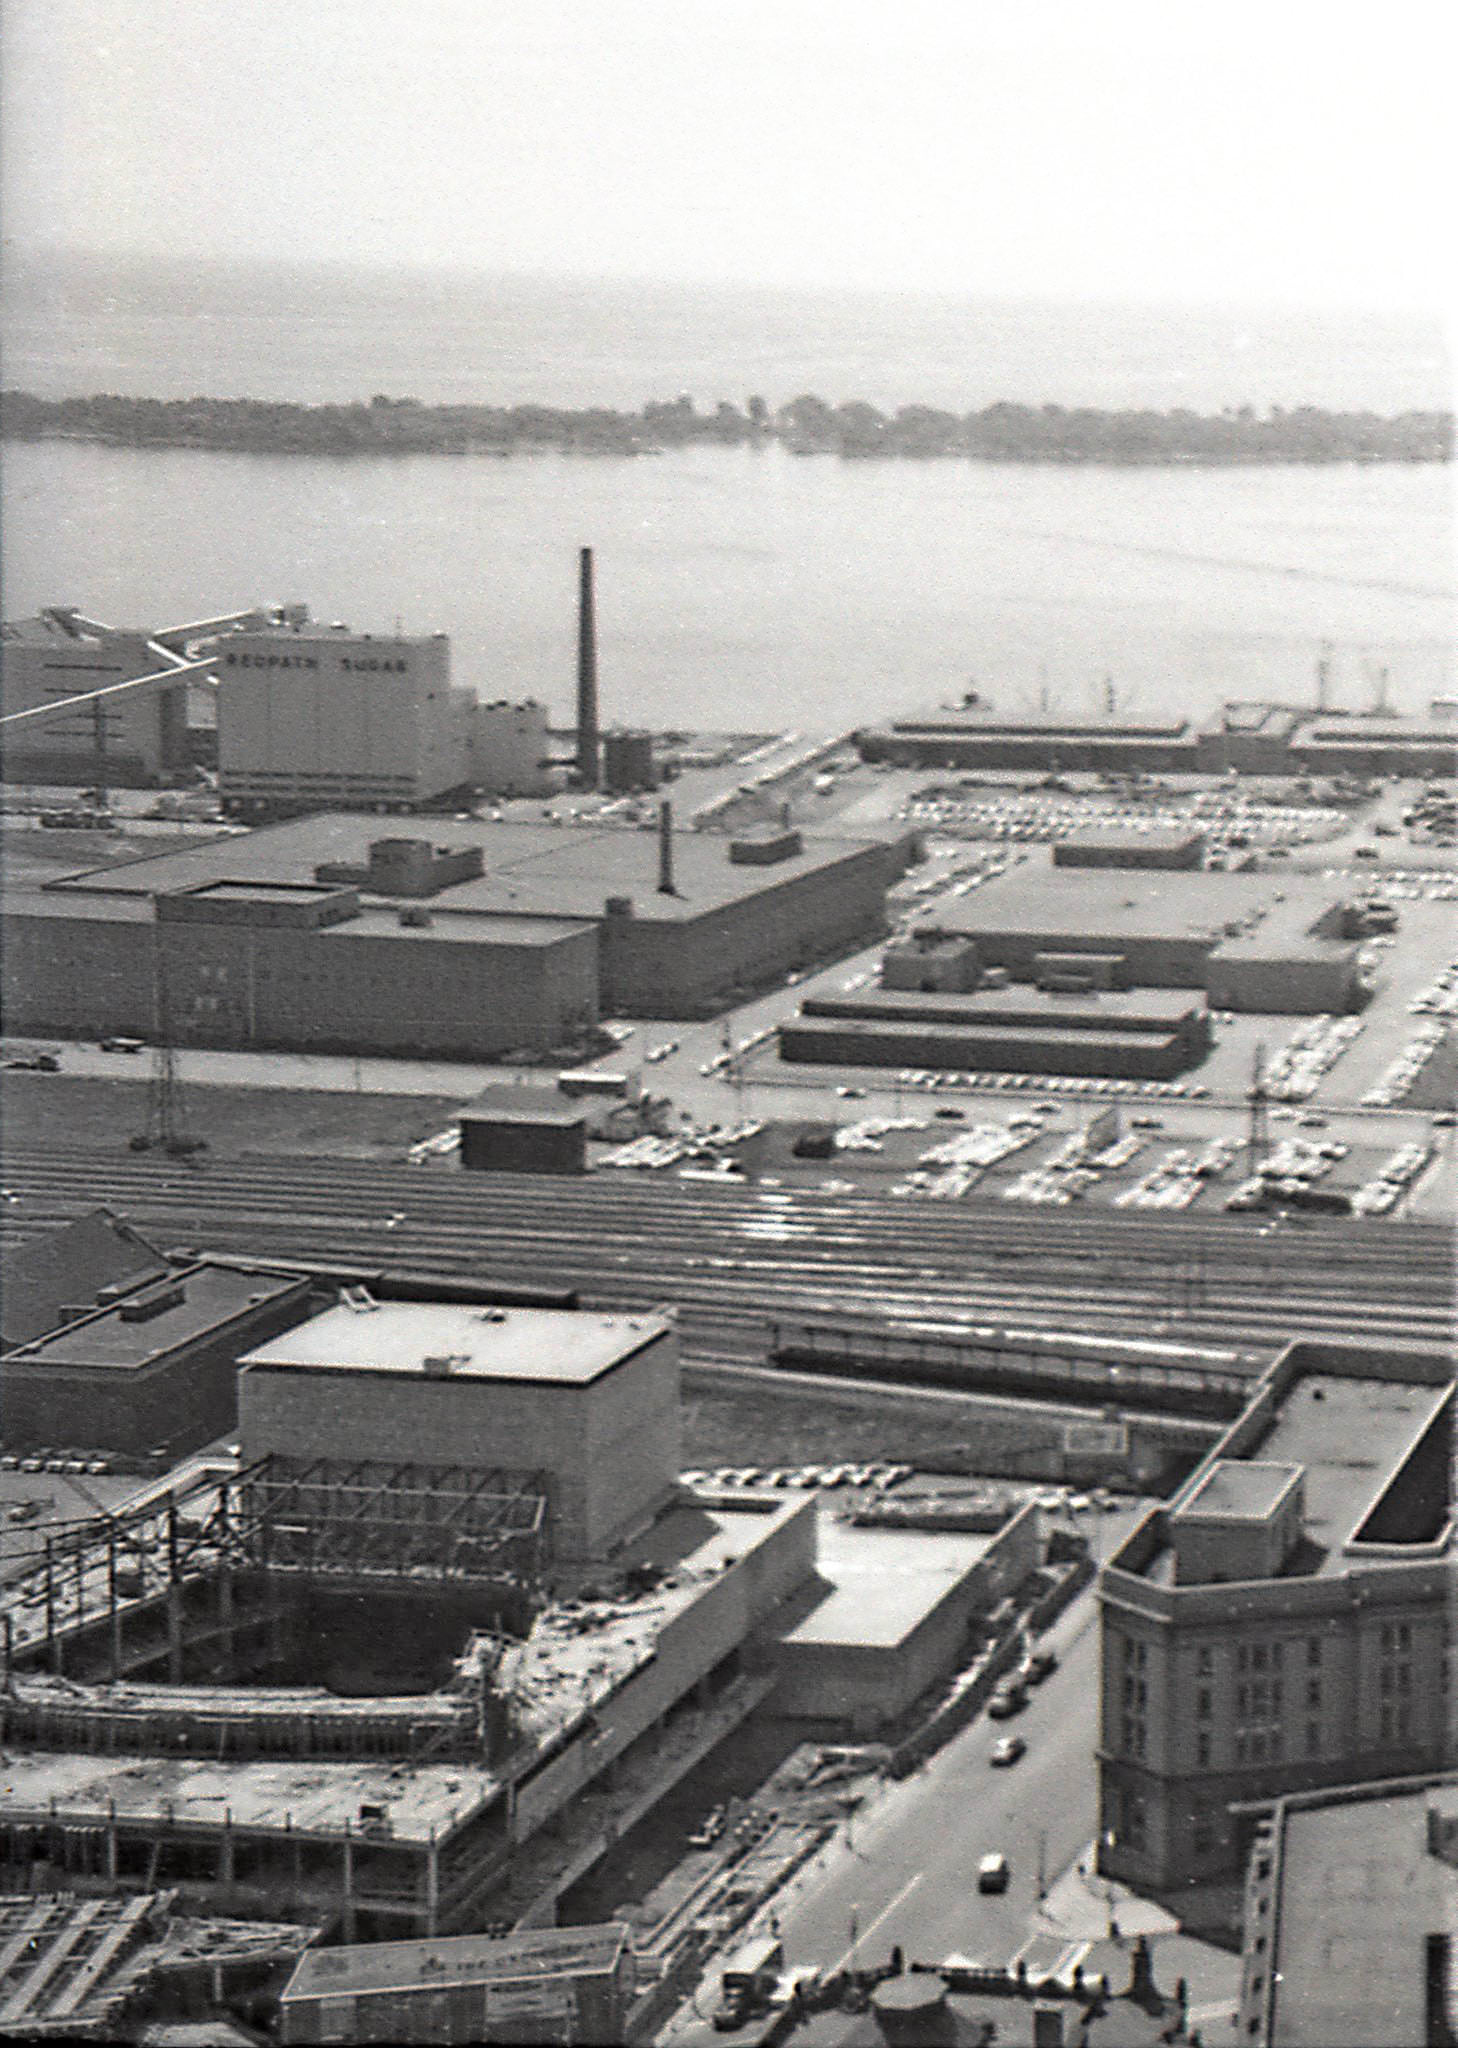 Another view from the Bank of Commerce building, 1959.